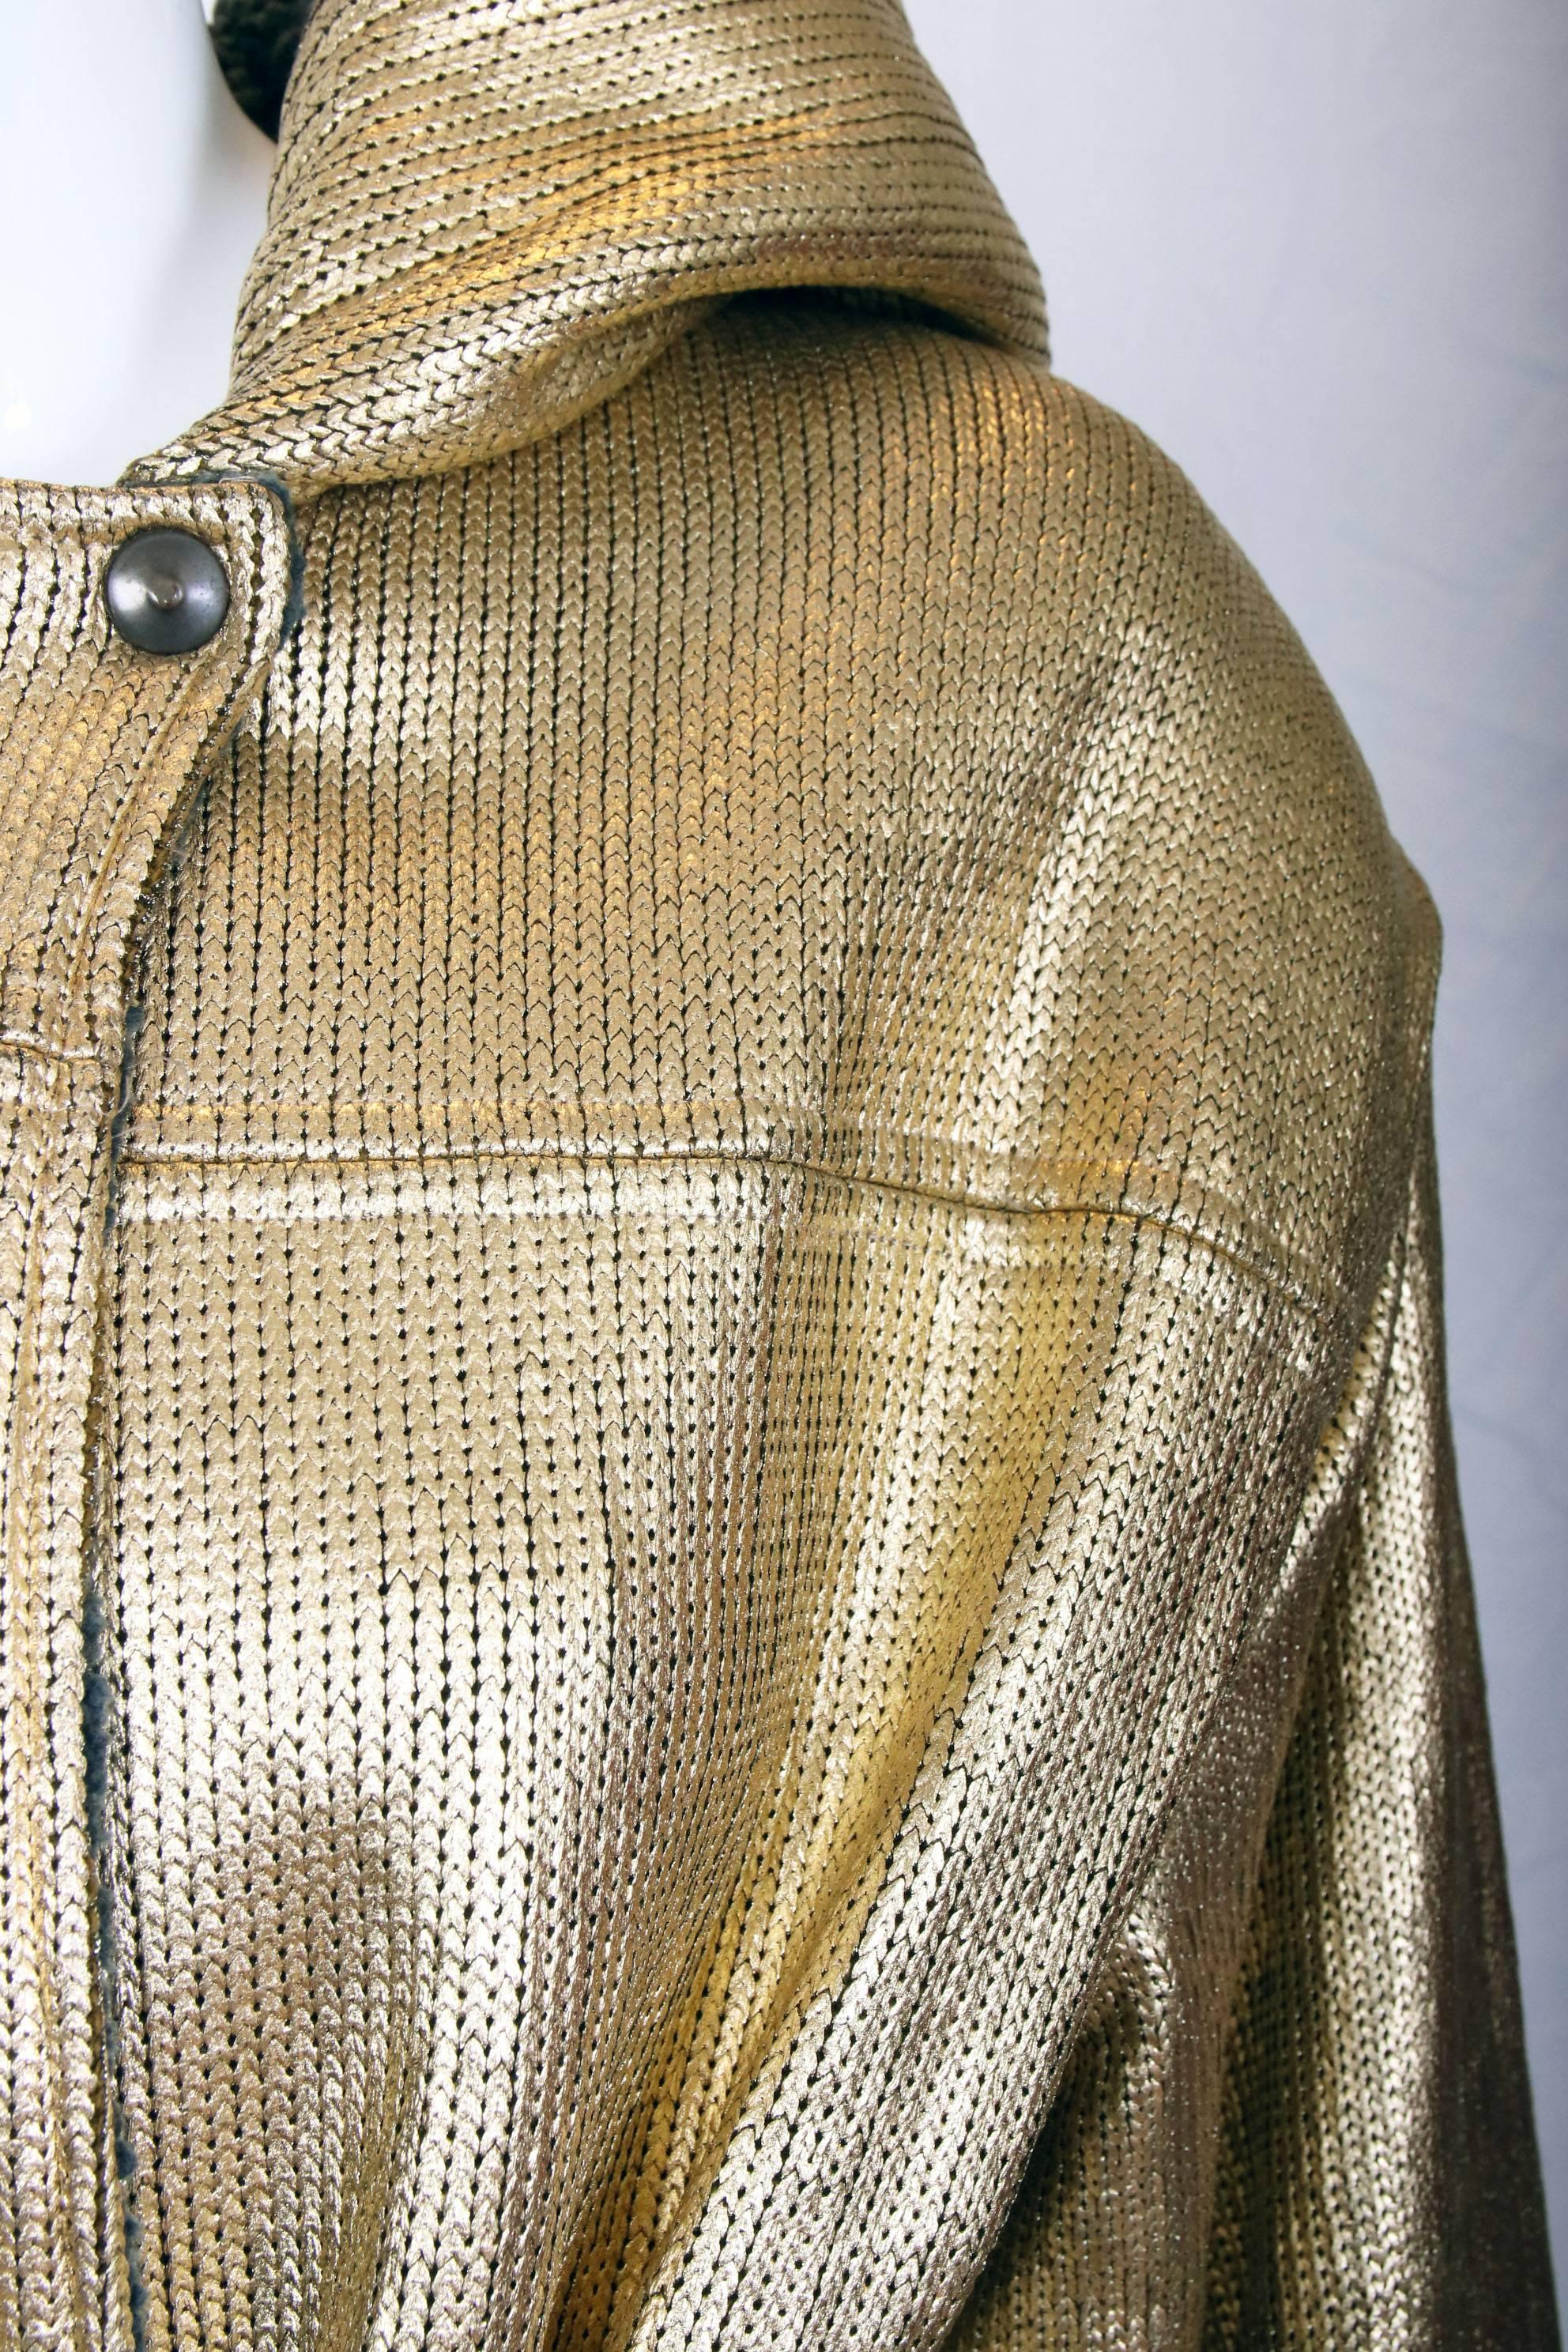 Gianfranco Ferre oversized gold hooded jacket w/bulky waist tie and lambswool blend interior. The jacket is made of an acrylic fiber transfer fibre - which I have no idea what that is. It's some kind of stretchy knit that looks as if it was painted